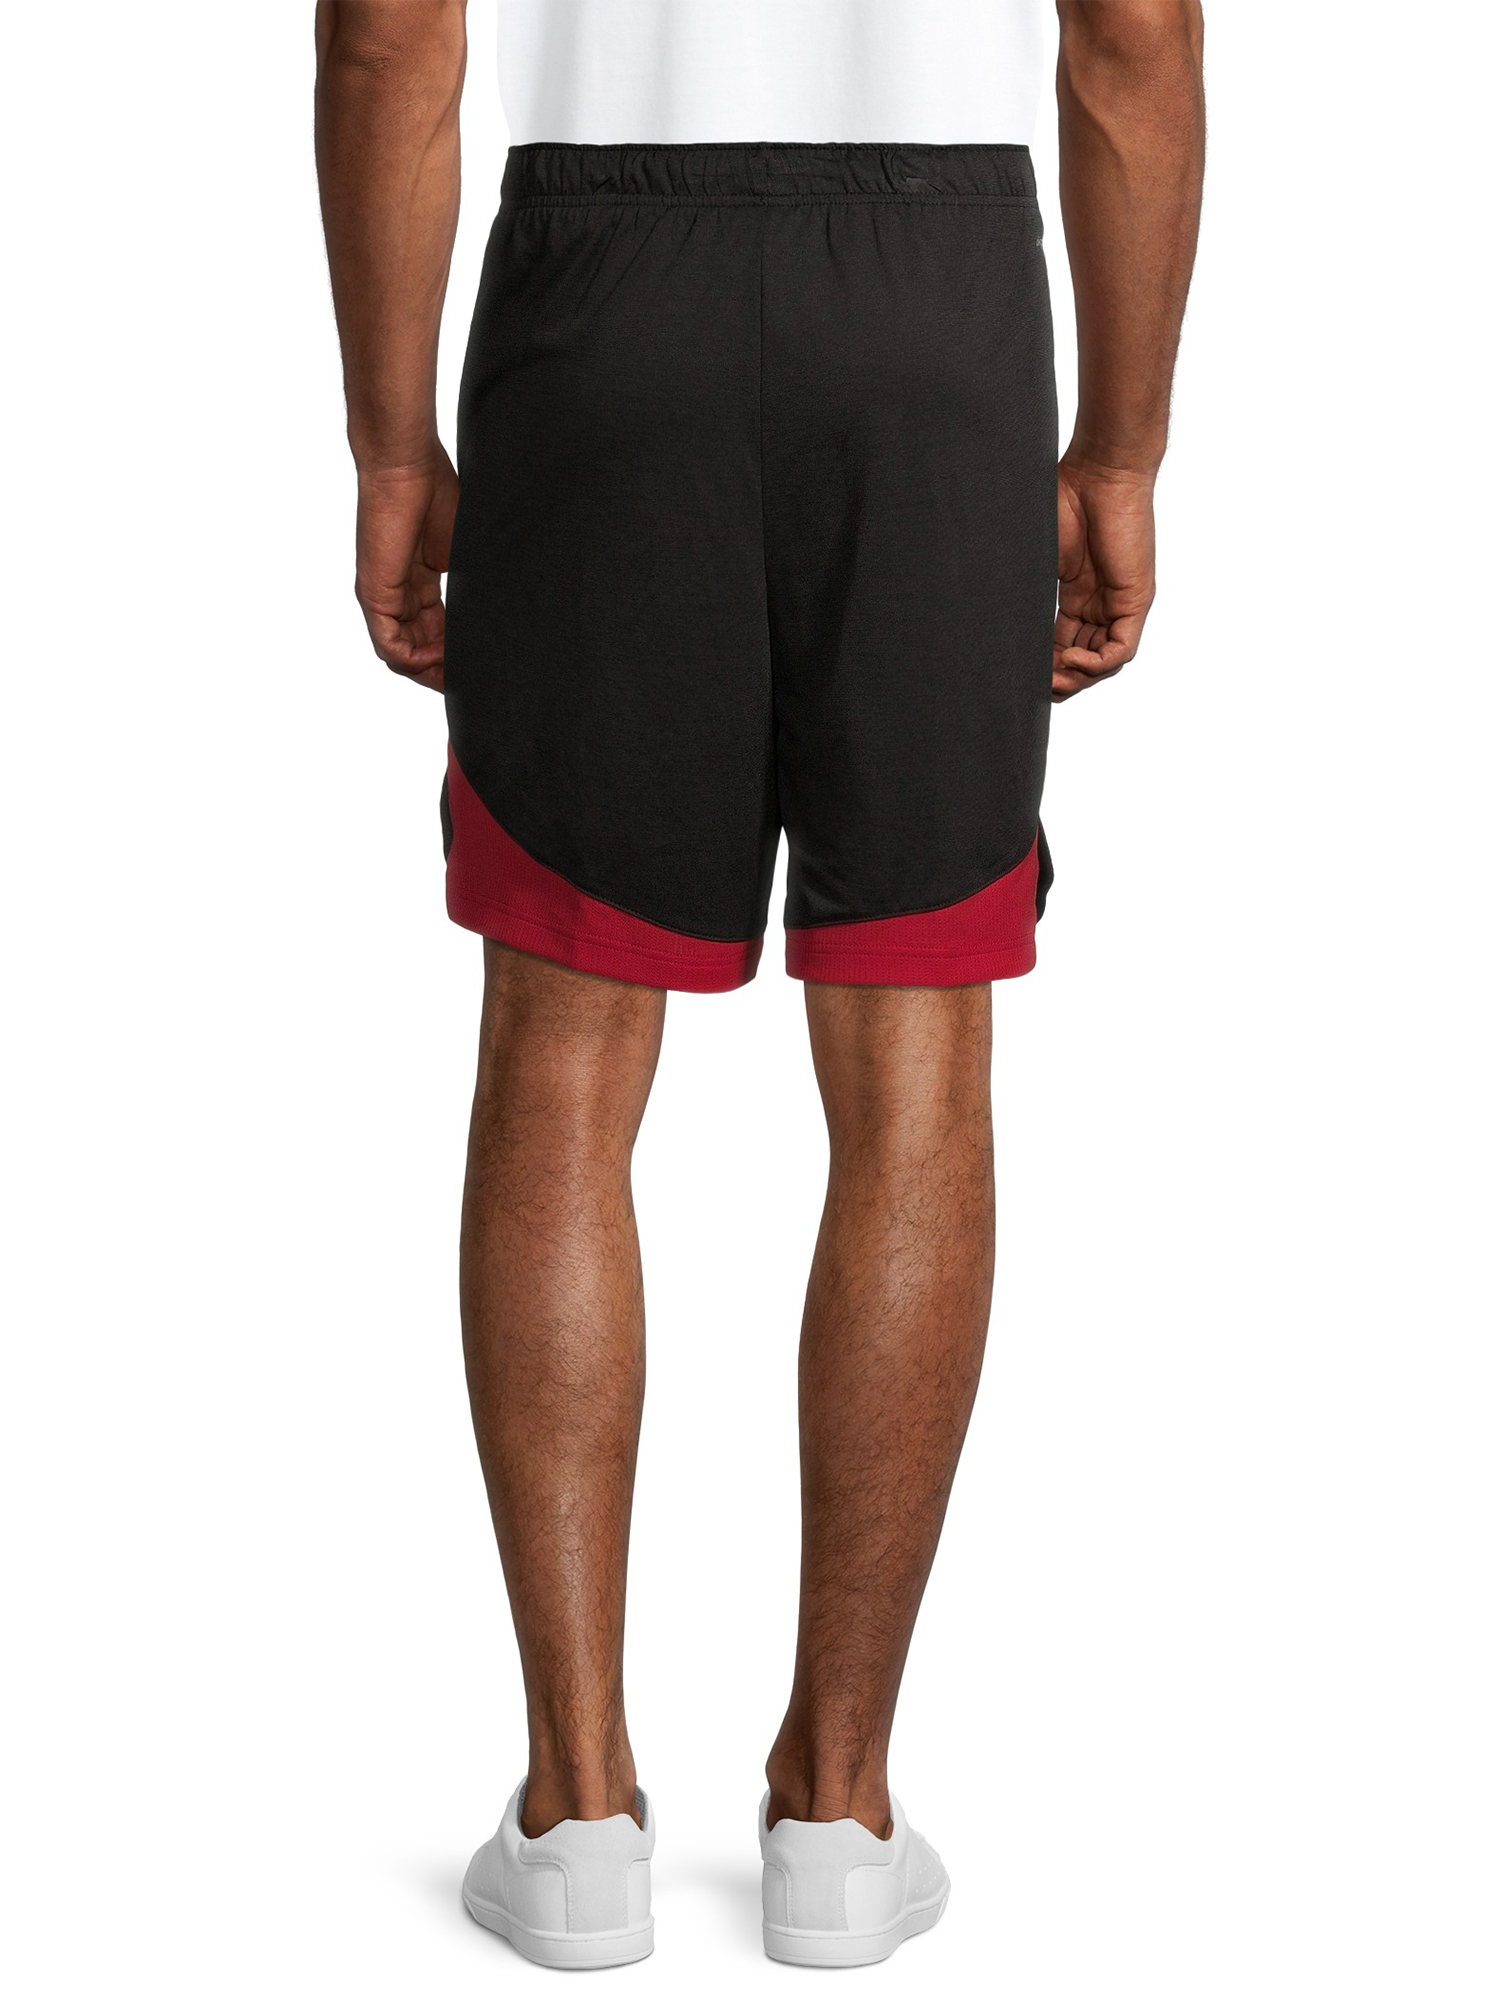 Russell Men's 9" Core Performance Active Shorts, up to Size 5XL - image 2 of 6